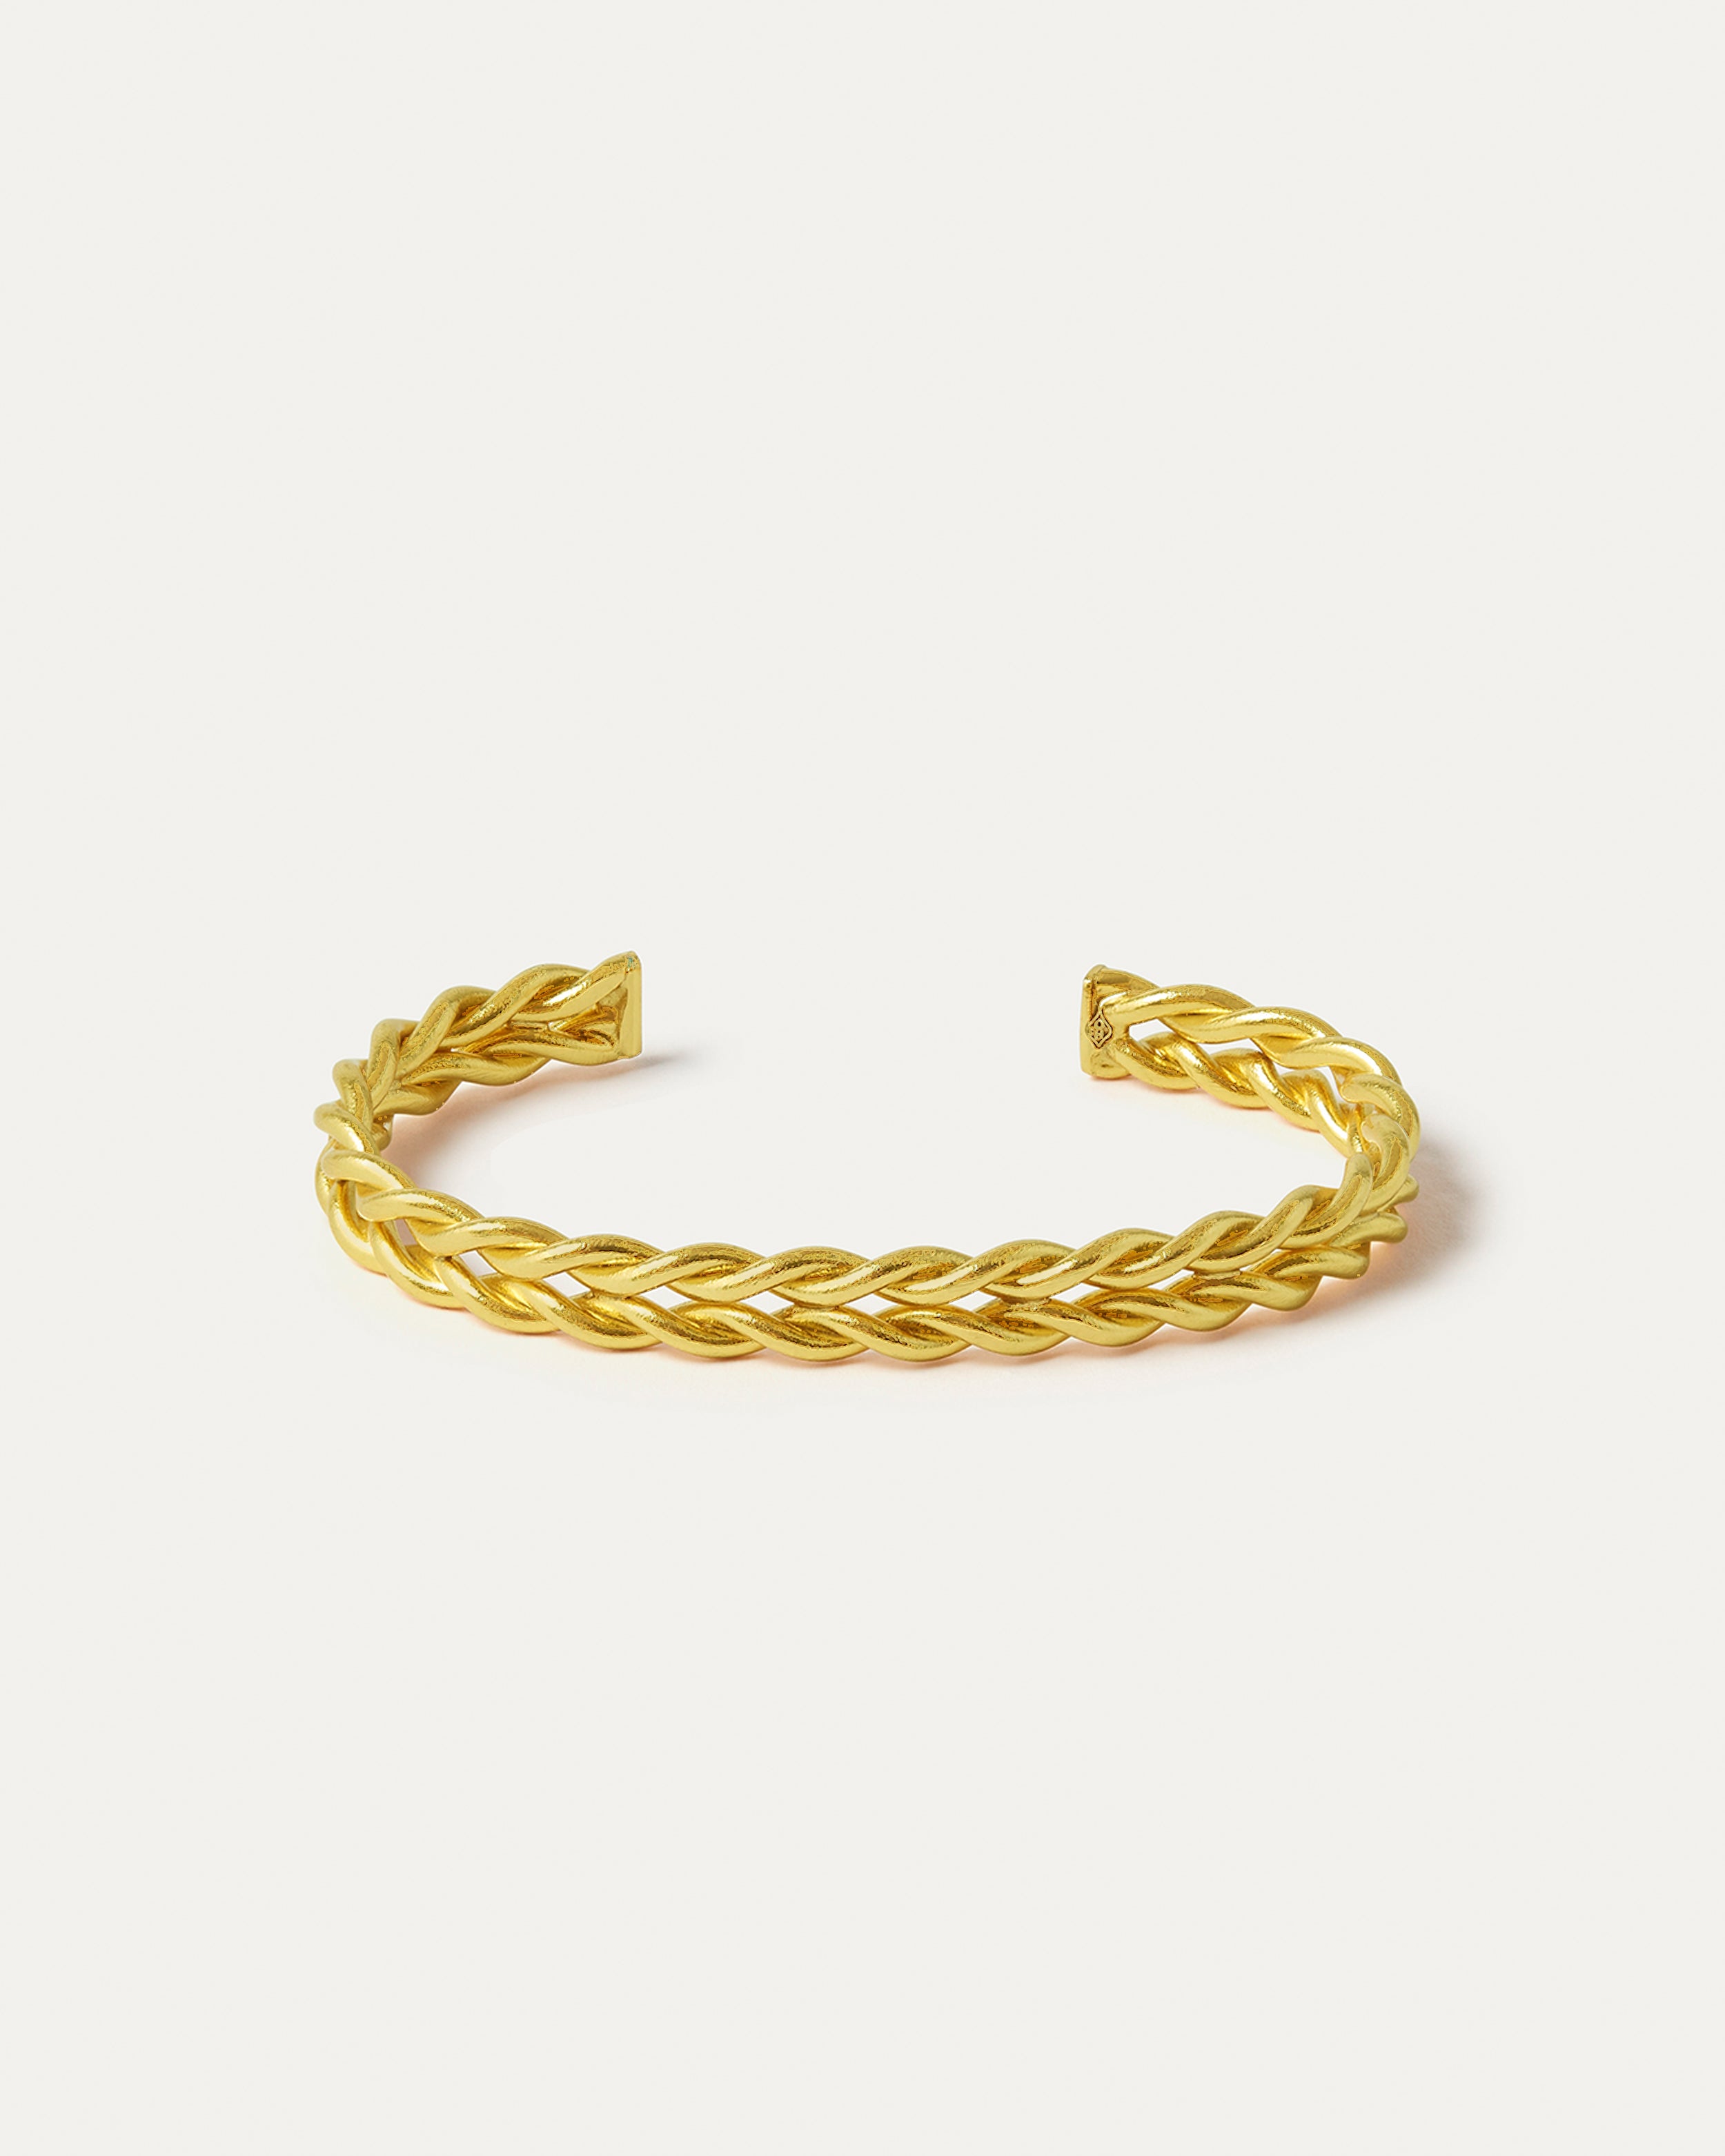 Imani Braided Cuff Bracelet | Sustainable Jewellery by Ottoman Hands